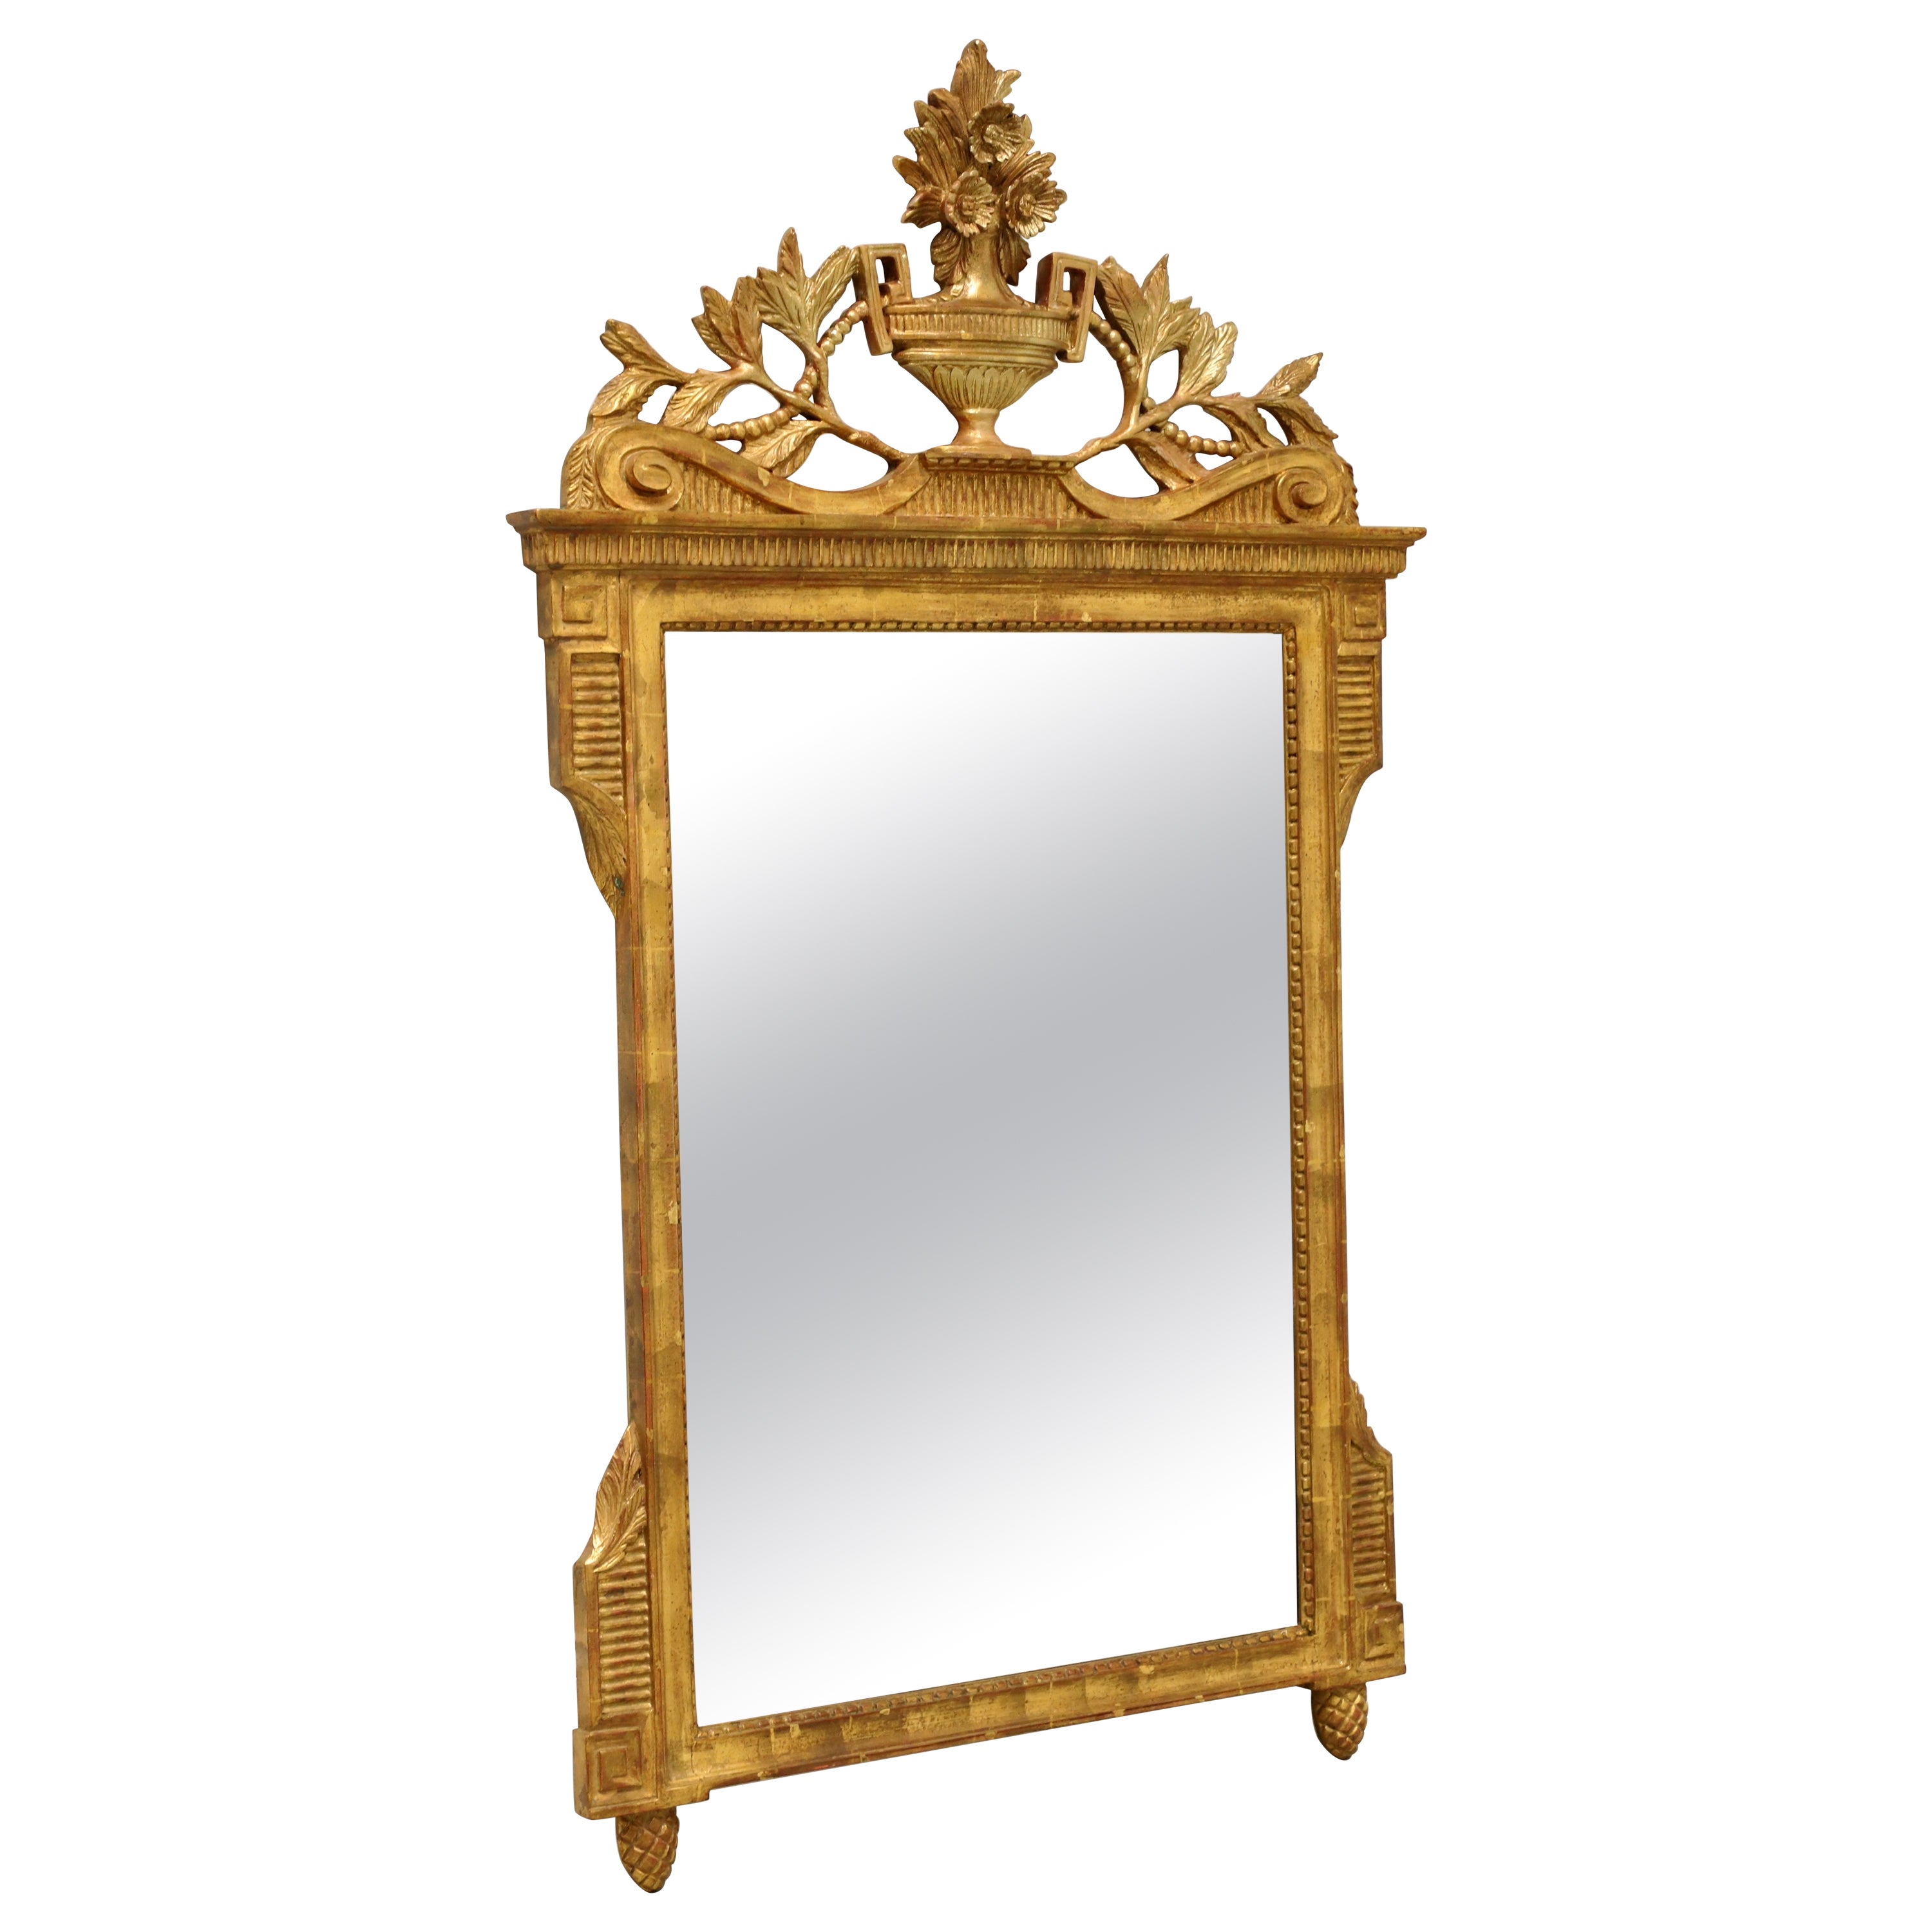 Mid 20th Century Gold Gilt Carved Neoclassical Style Beveled Wall Mirror For Sale